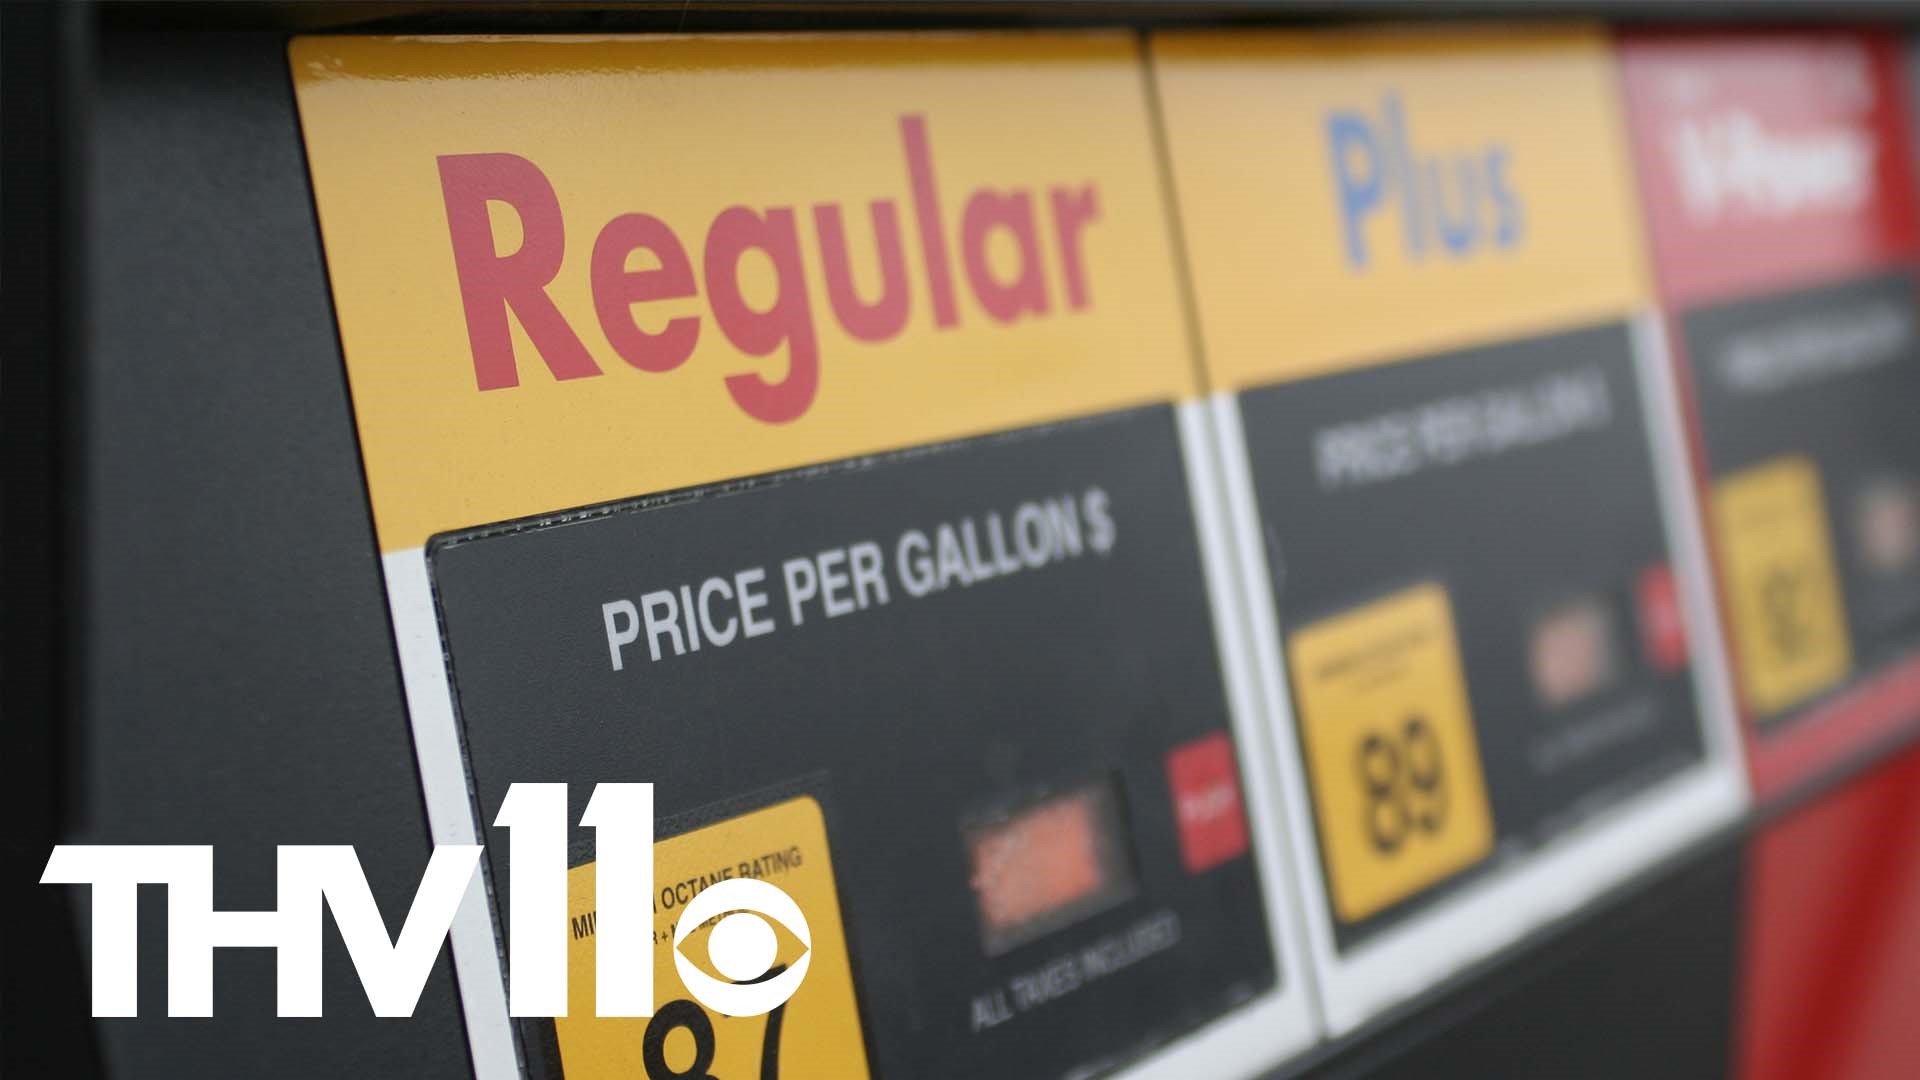 It's something that we're seeing each day-- rising gas prices. According to AAA, Arkansas drivers are now paying an average price of $3.90 per gallon.